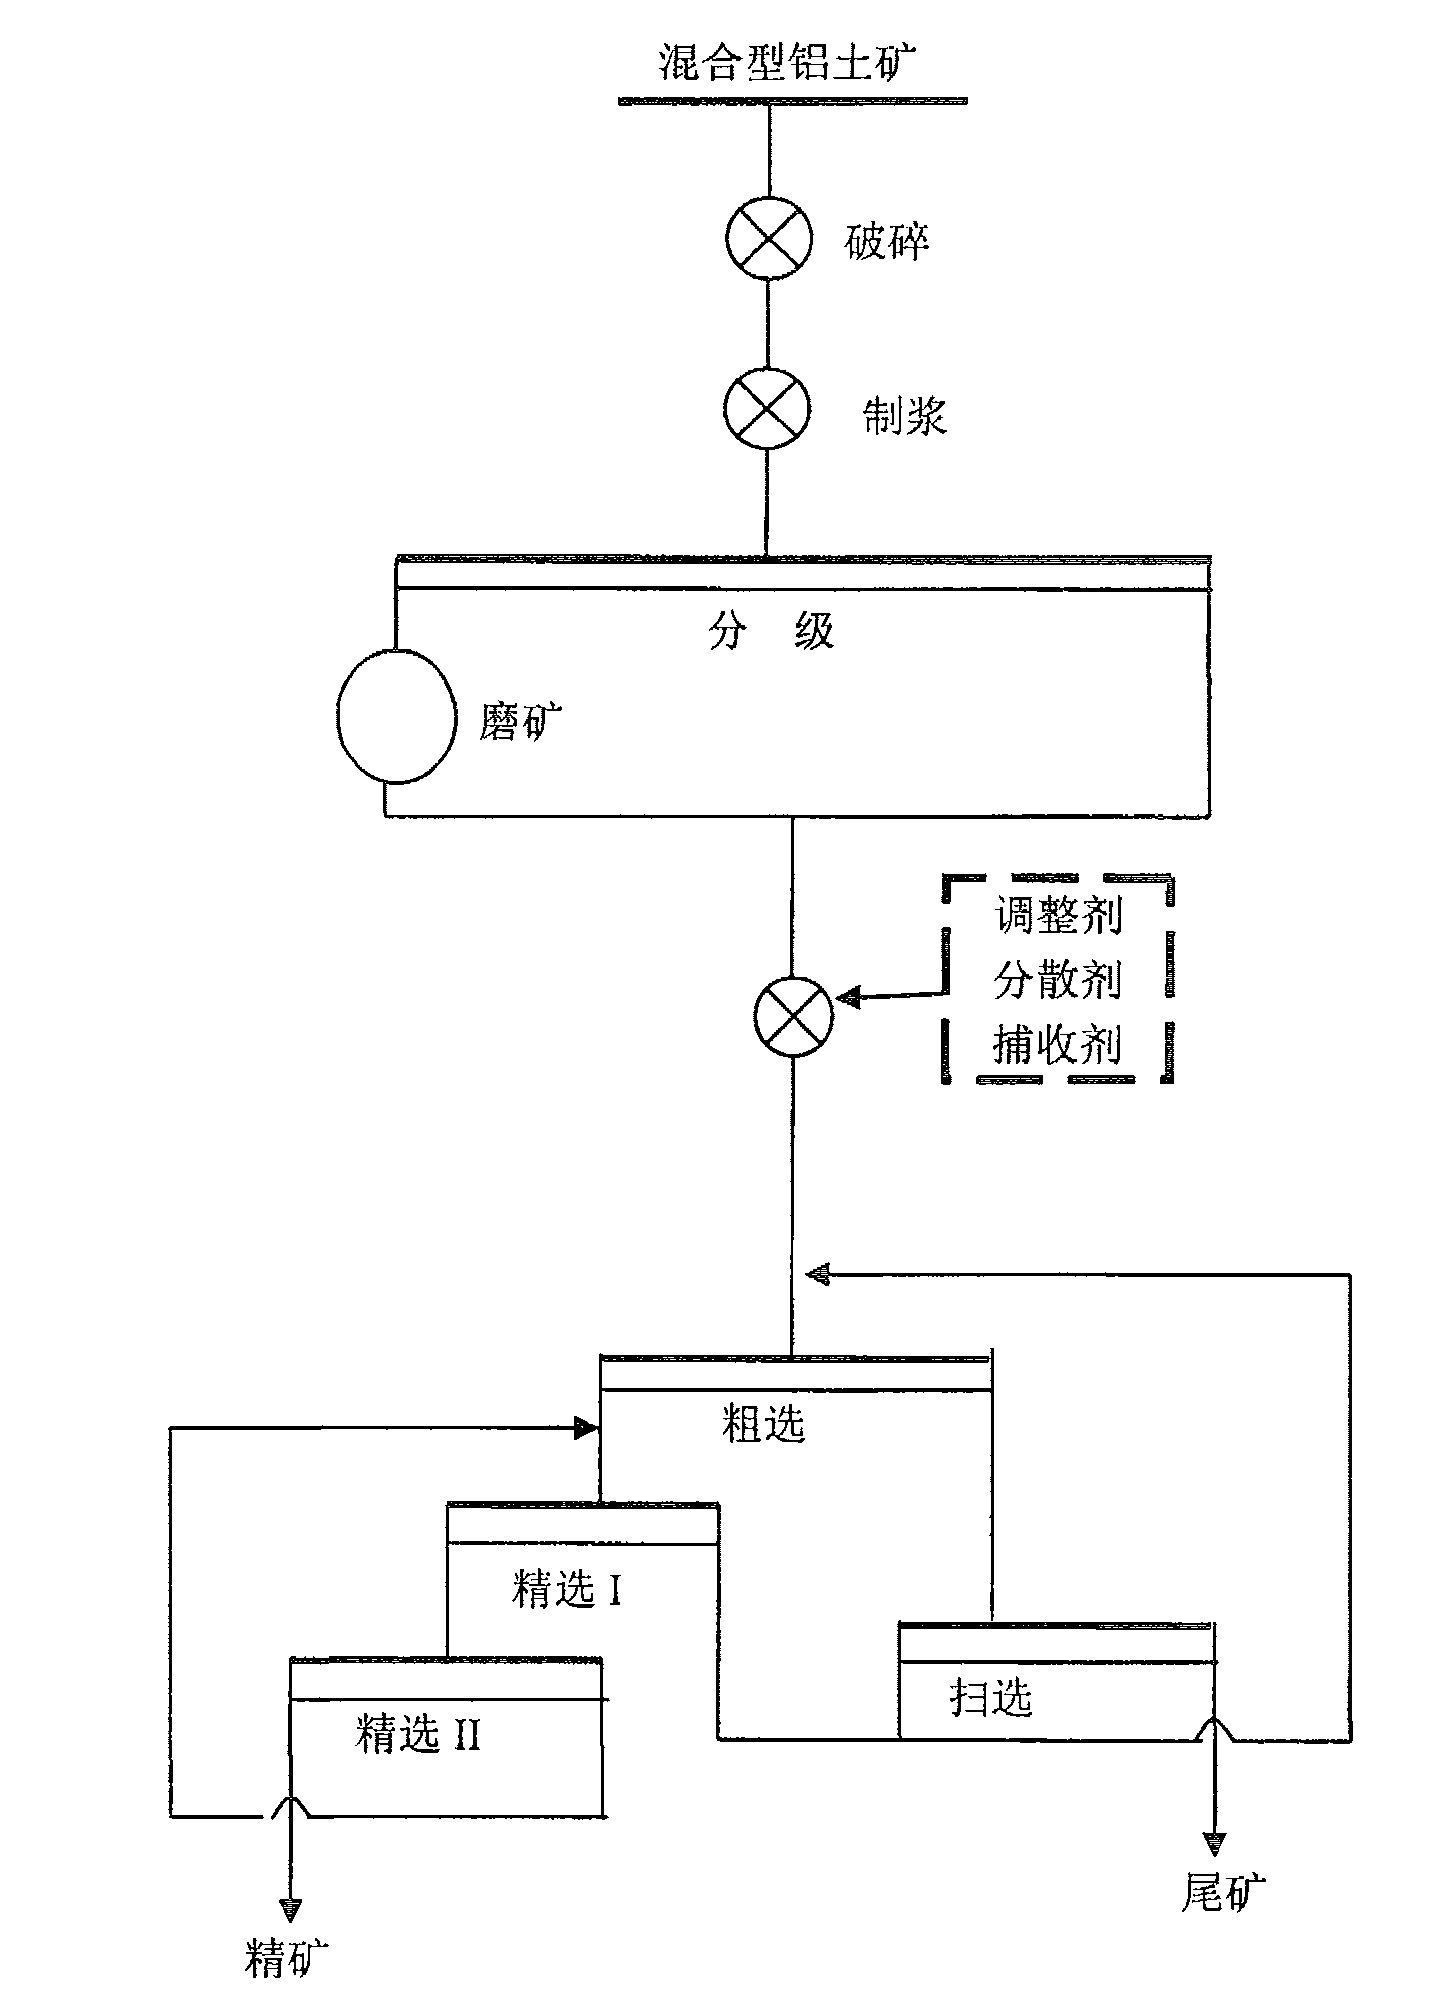 Method for ore dressing and desilicating mixed type bauxite